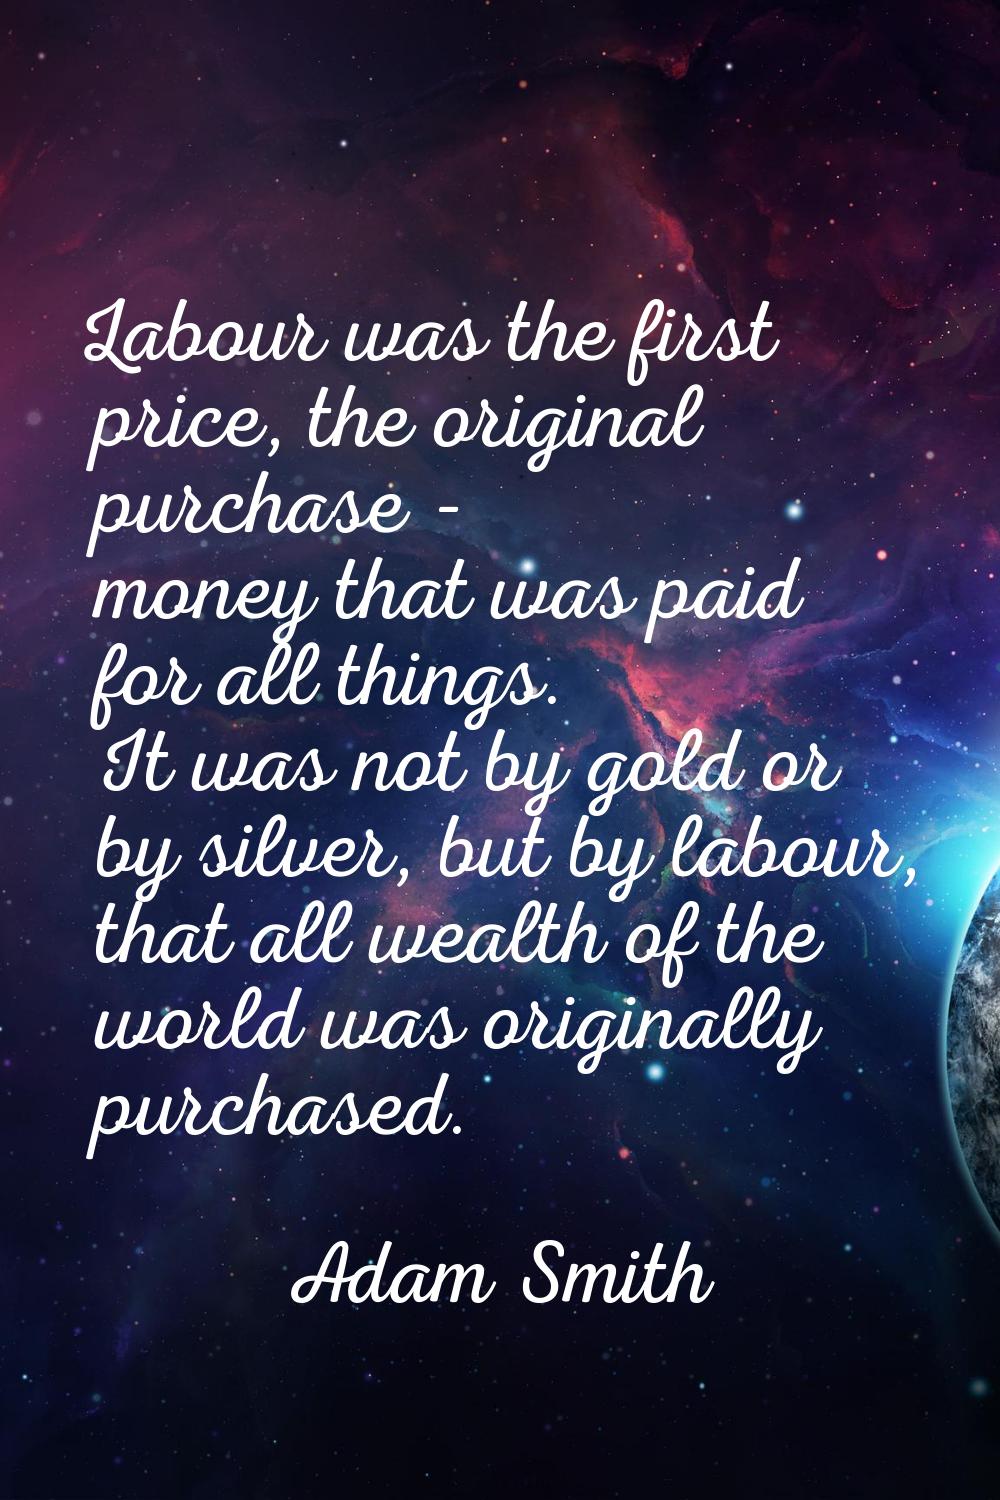 Labour was the first price, the original purchase - money that was paid for all things. It was not 